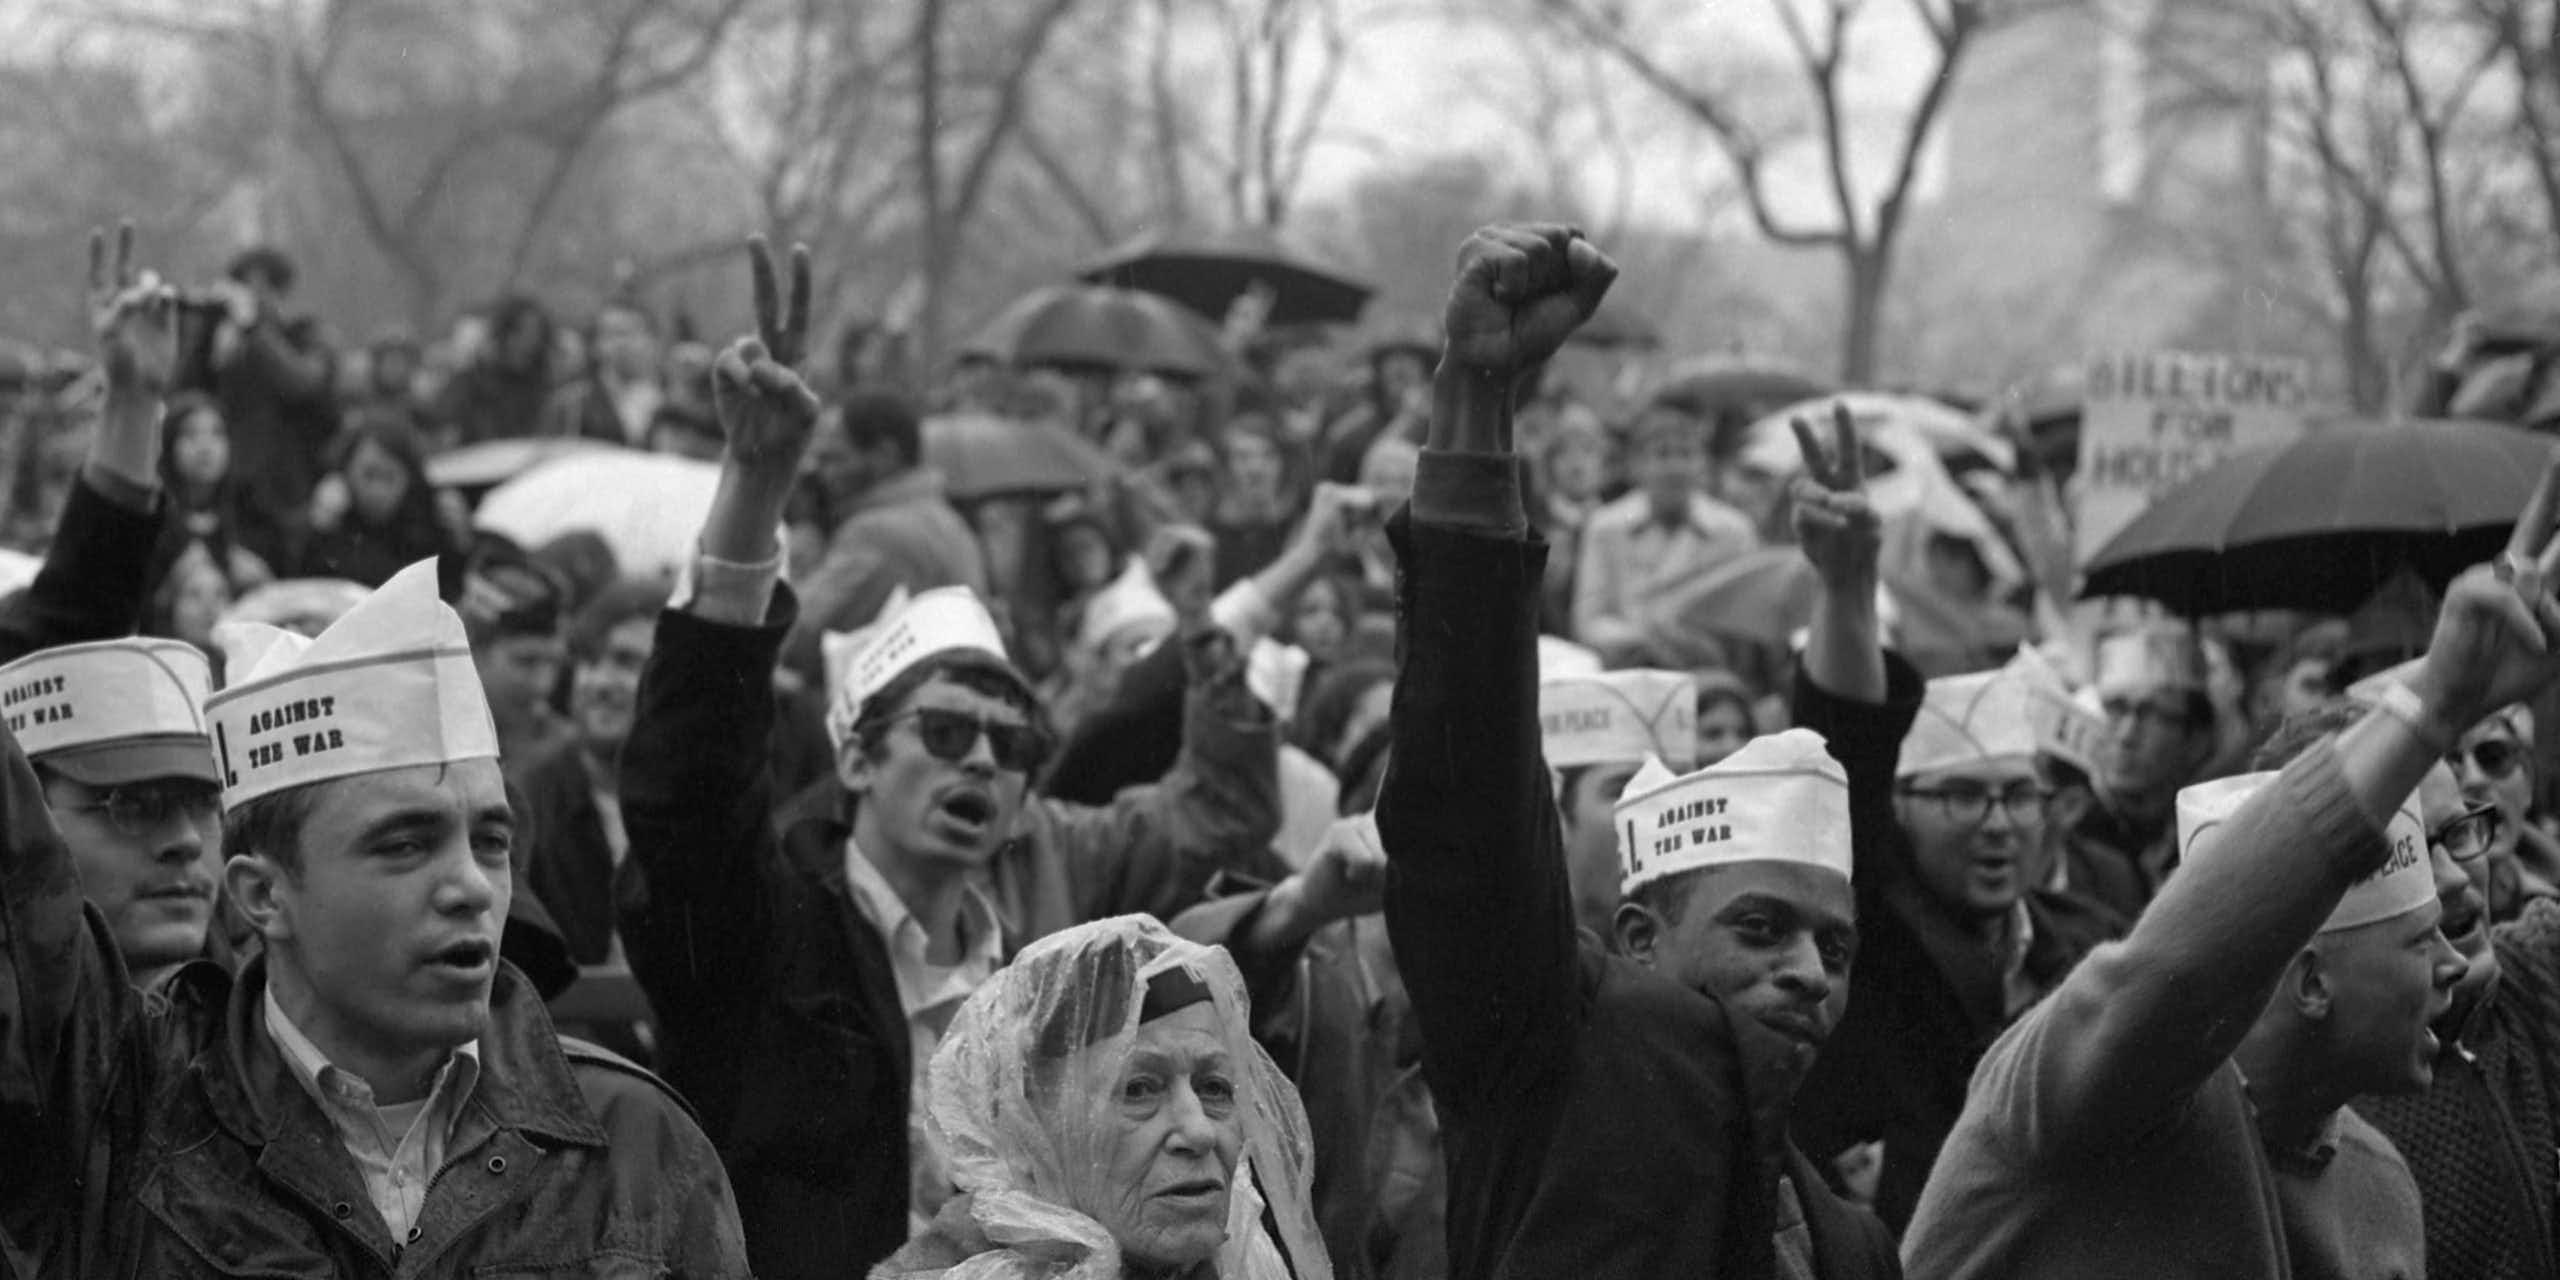 A crowd of demonstrators are raising their fists in protest aganst the Vietnam War. 